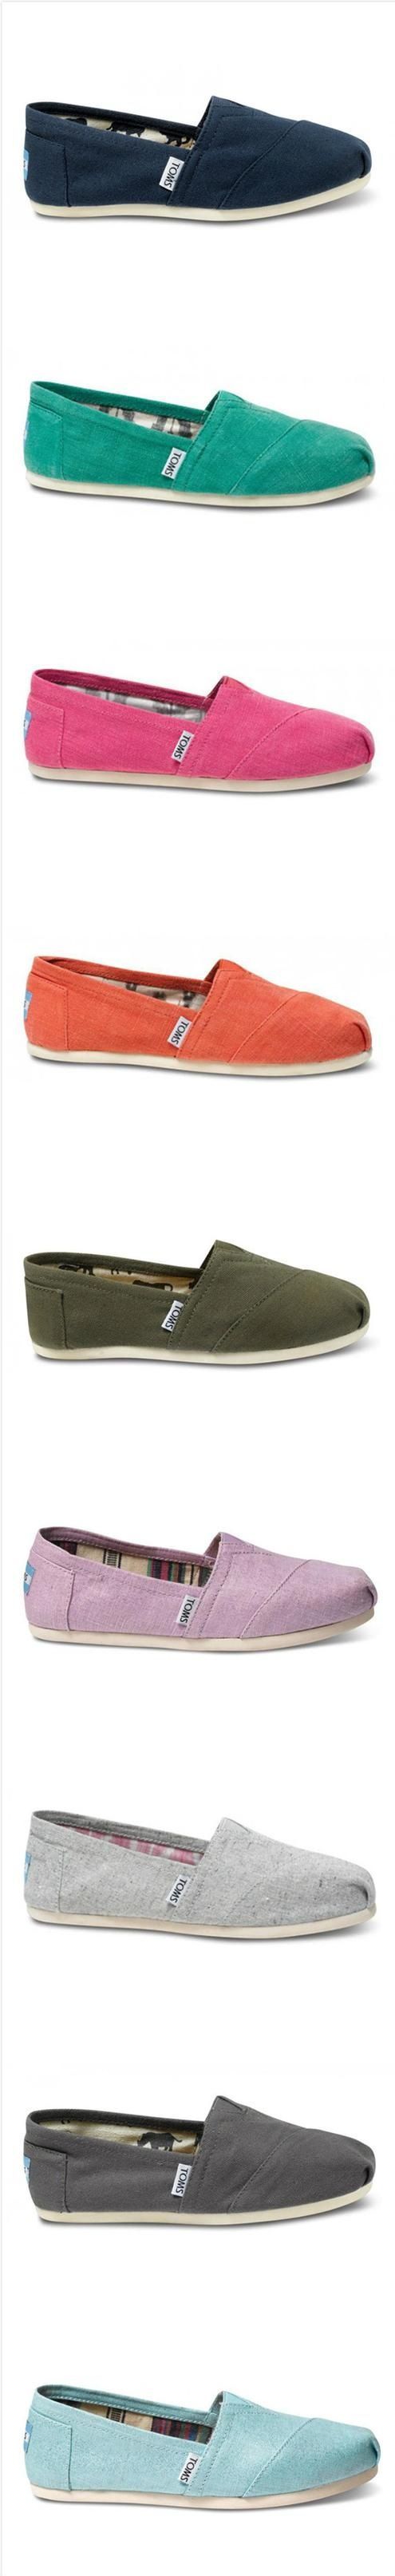 Buy Cheap Toms Shoes On Our Toms Outlet Store Online, 100% Cheap Toms Shoes For Sale, With Excellent Quality, Wholesale best toms